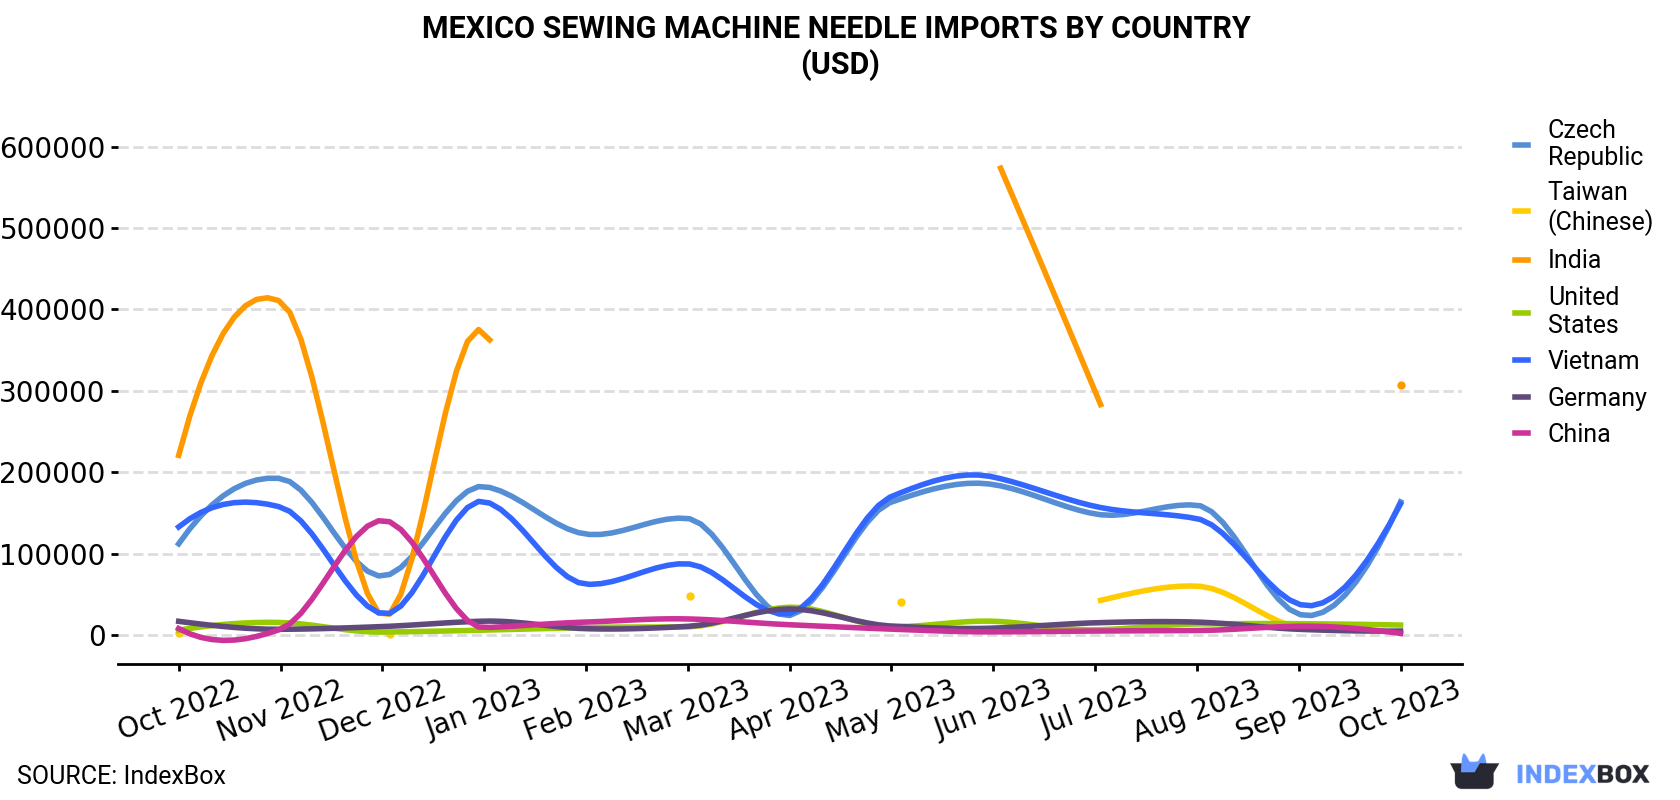 Mexico Sewing Machine Needle Imports By Country (USD)